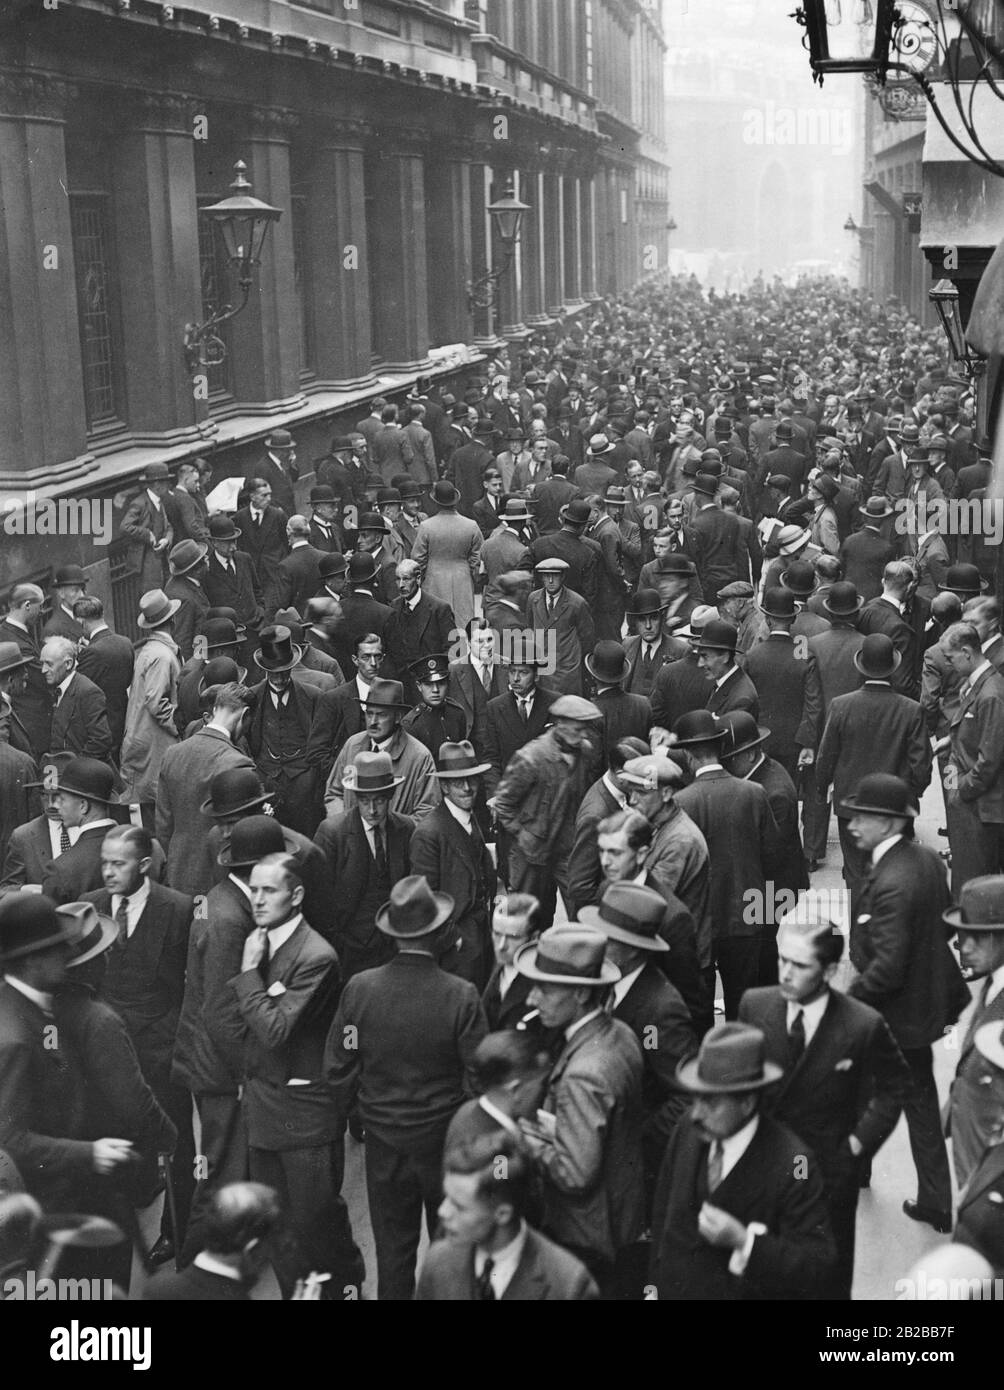 The Great Depression in Great Britain: People standing in front of the stock exchange at the Throgmorton Street. Stock Photo